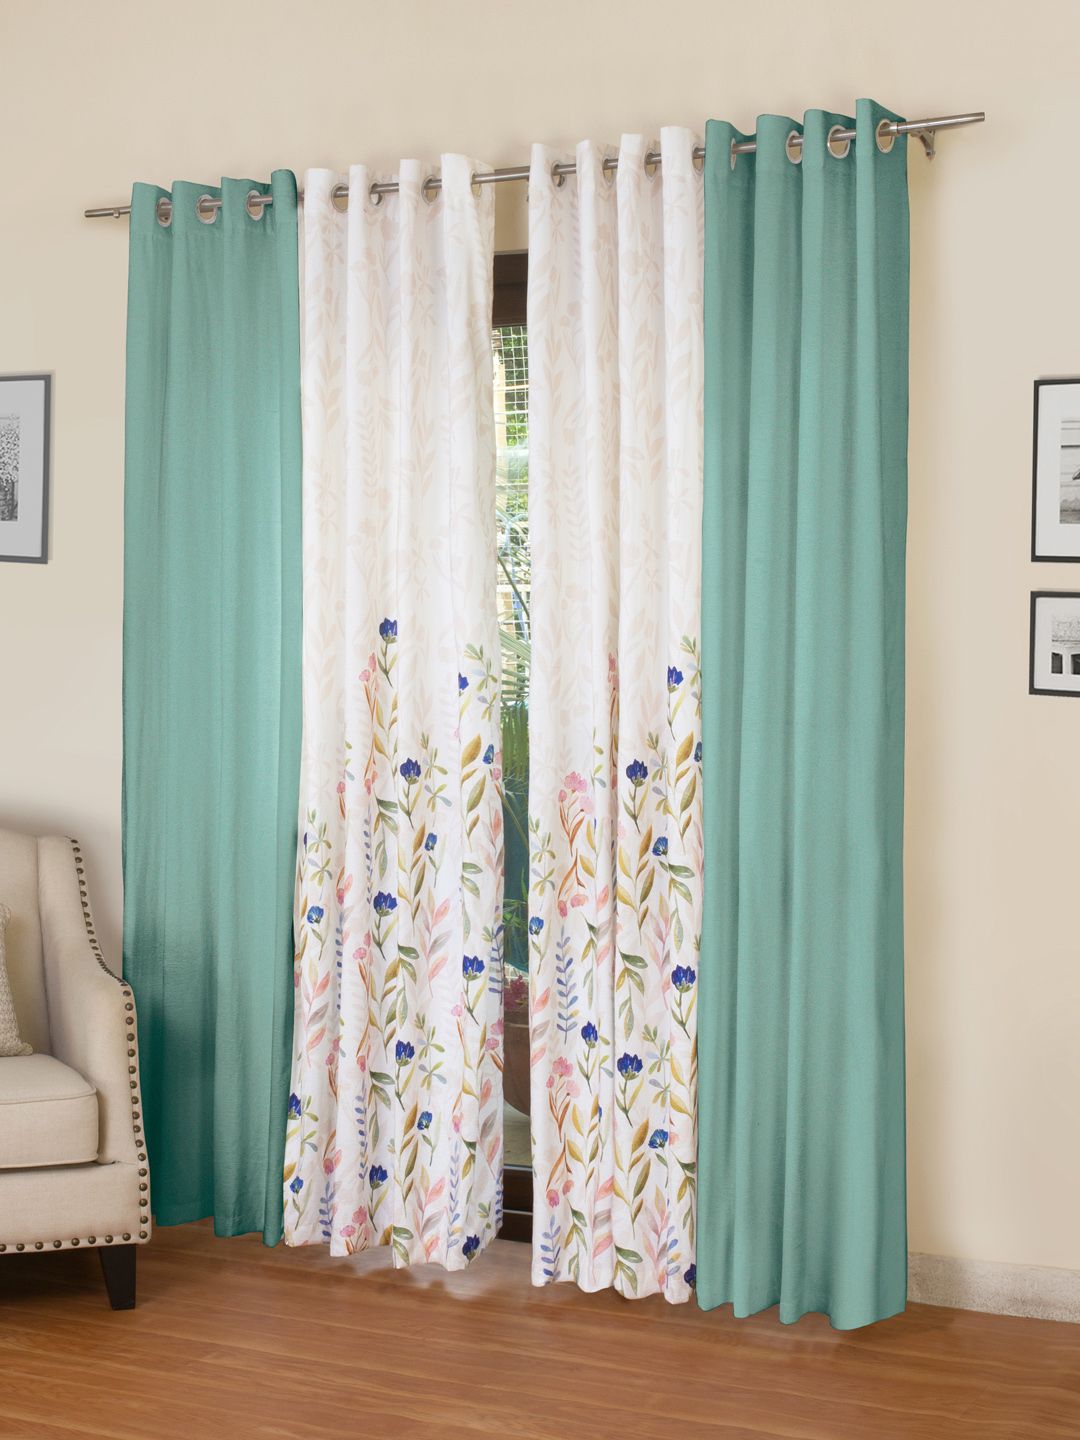 ROSARA HOME Turquoise Blue & White Set of 4 Door Curtains Price in India